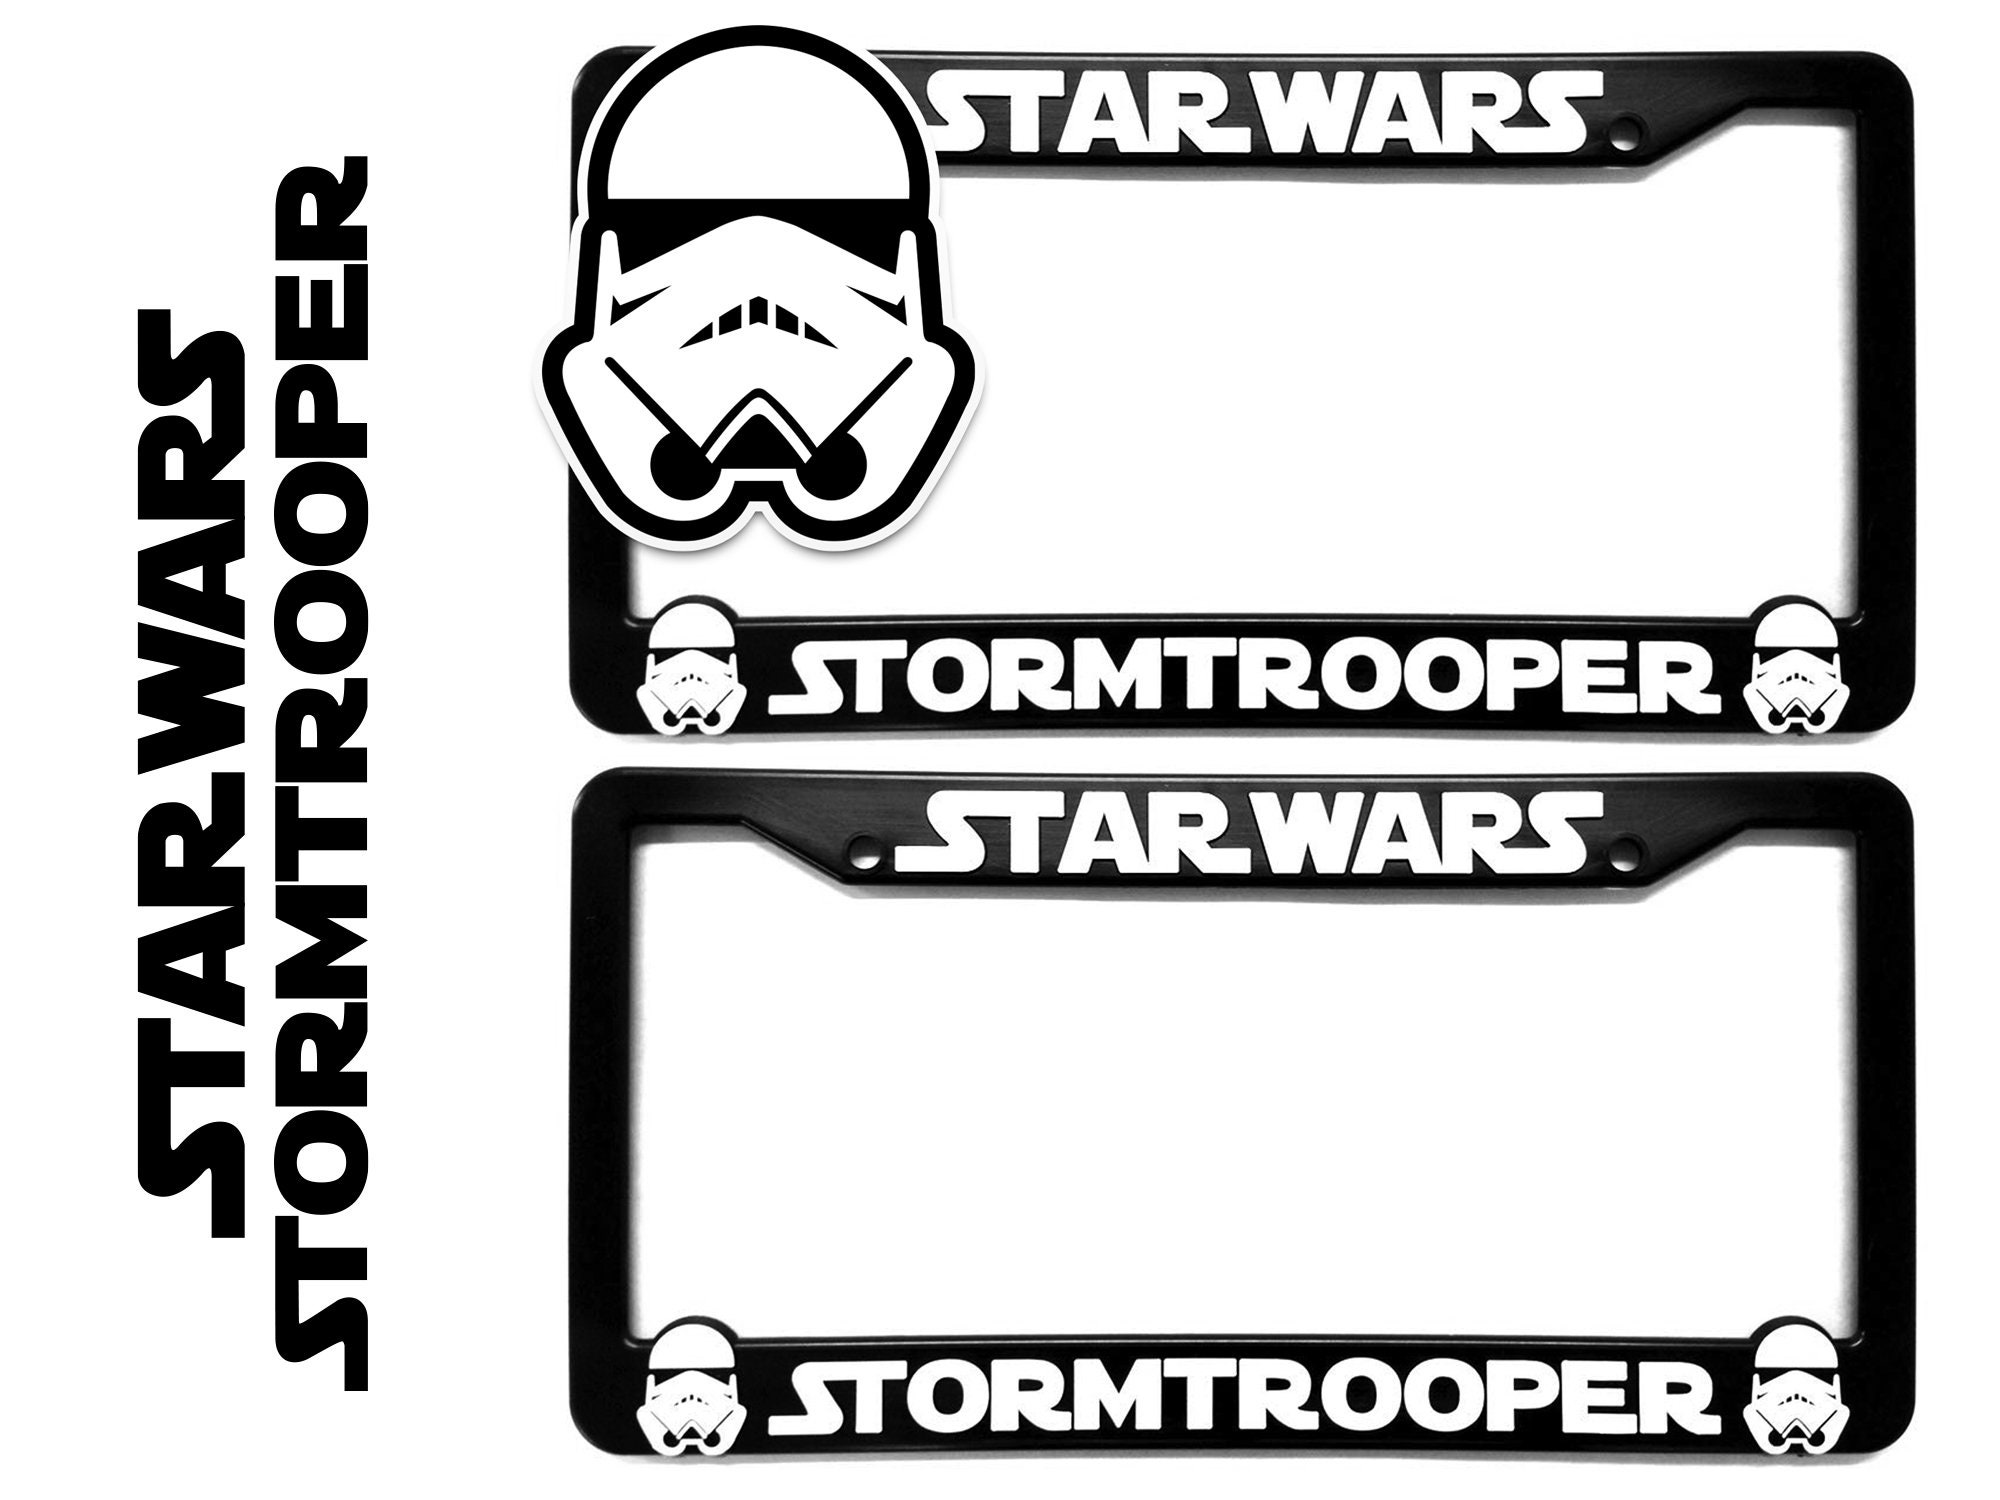 Sith Storm Trooper Darth Vader Style Black with Grey Motorcycle Scooter License Plate Frame 